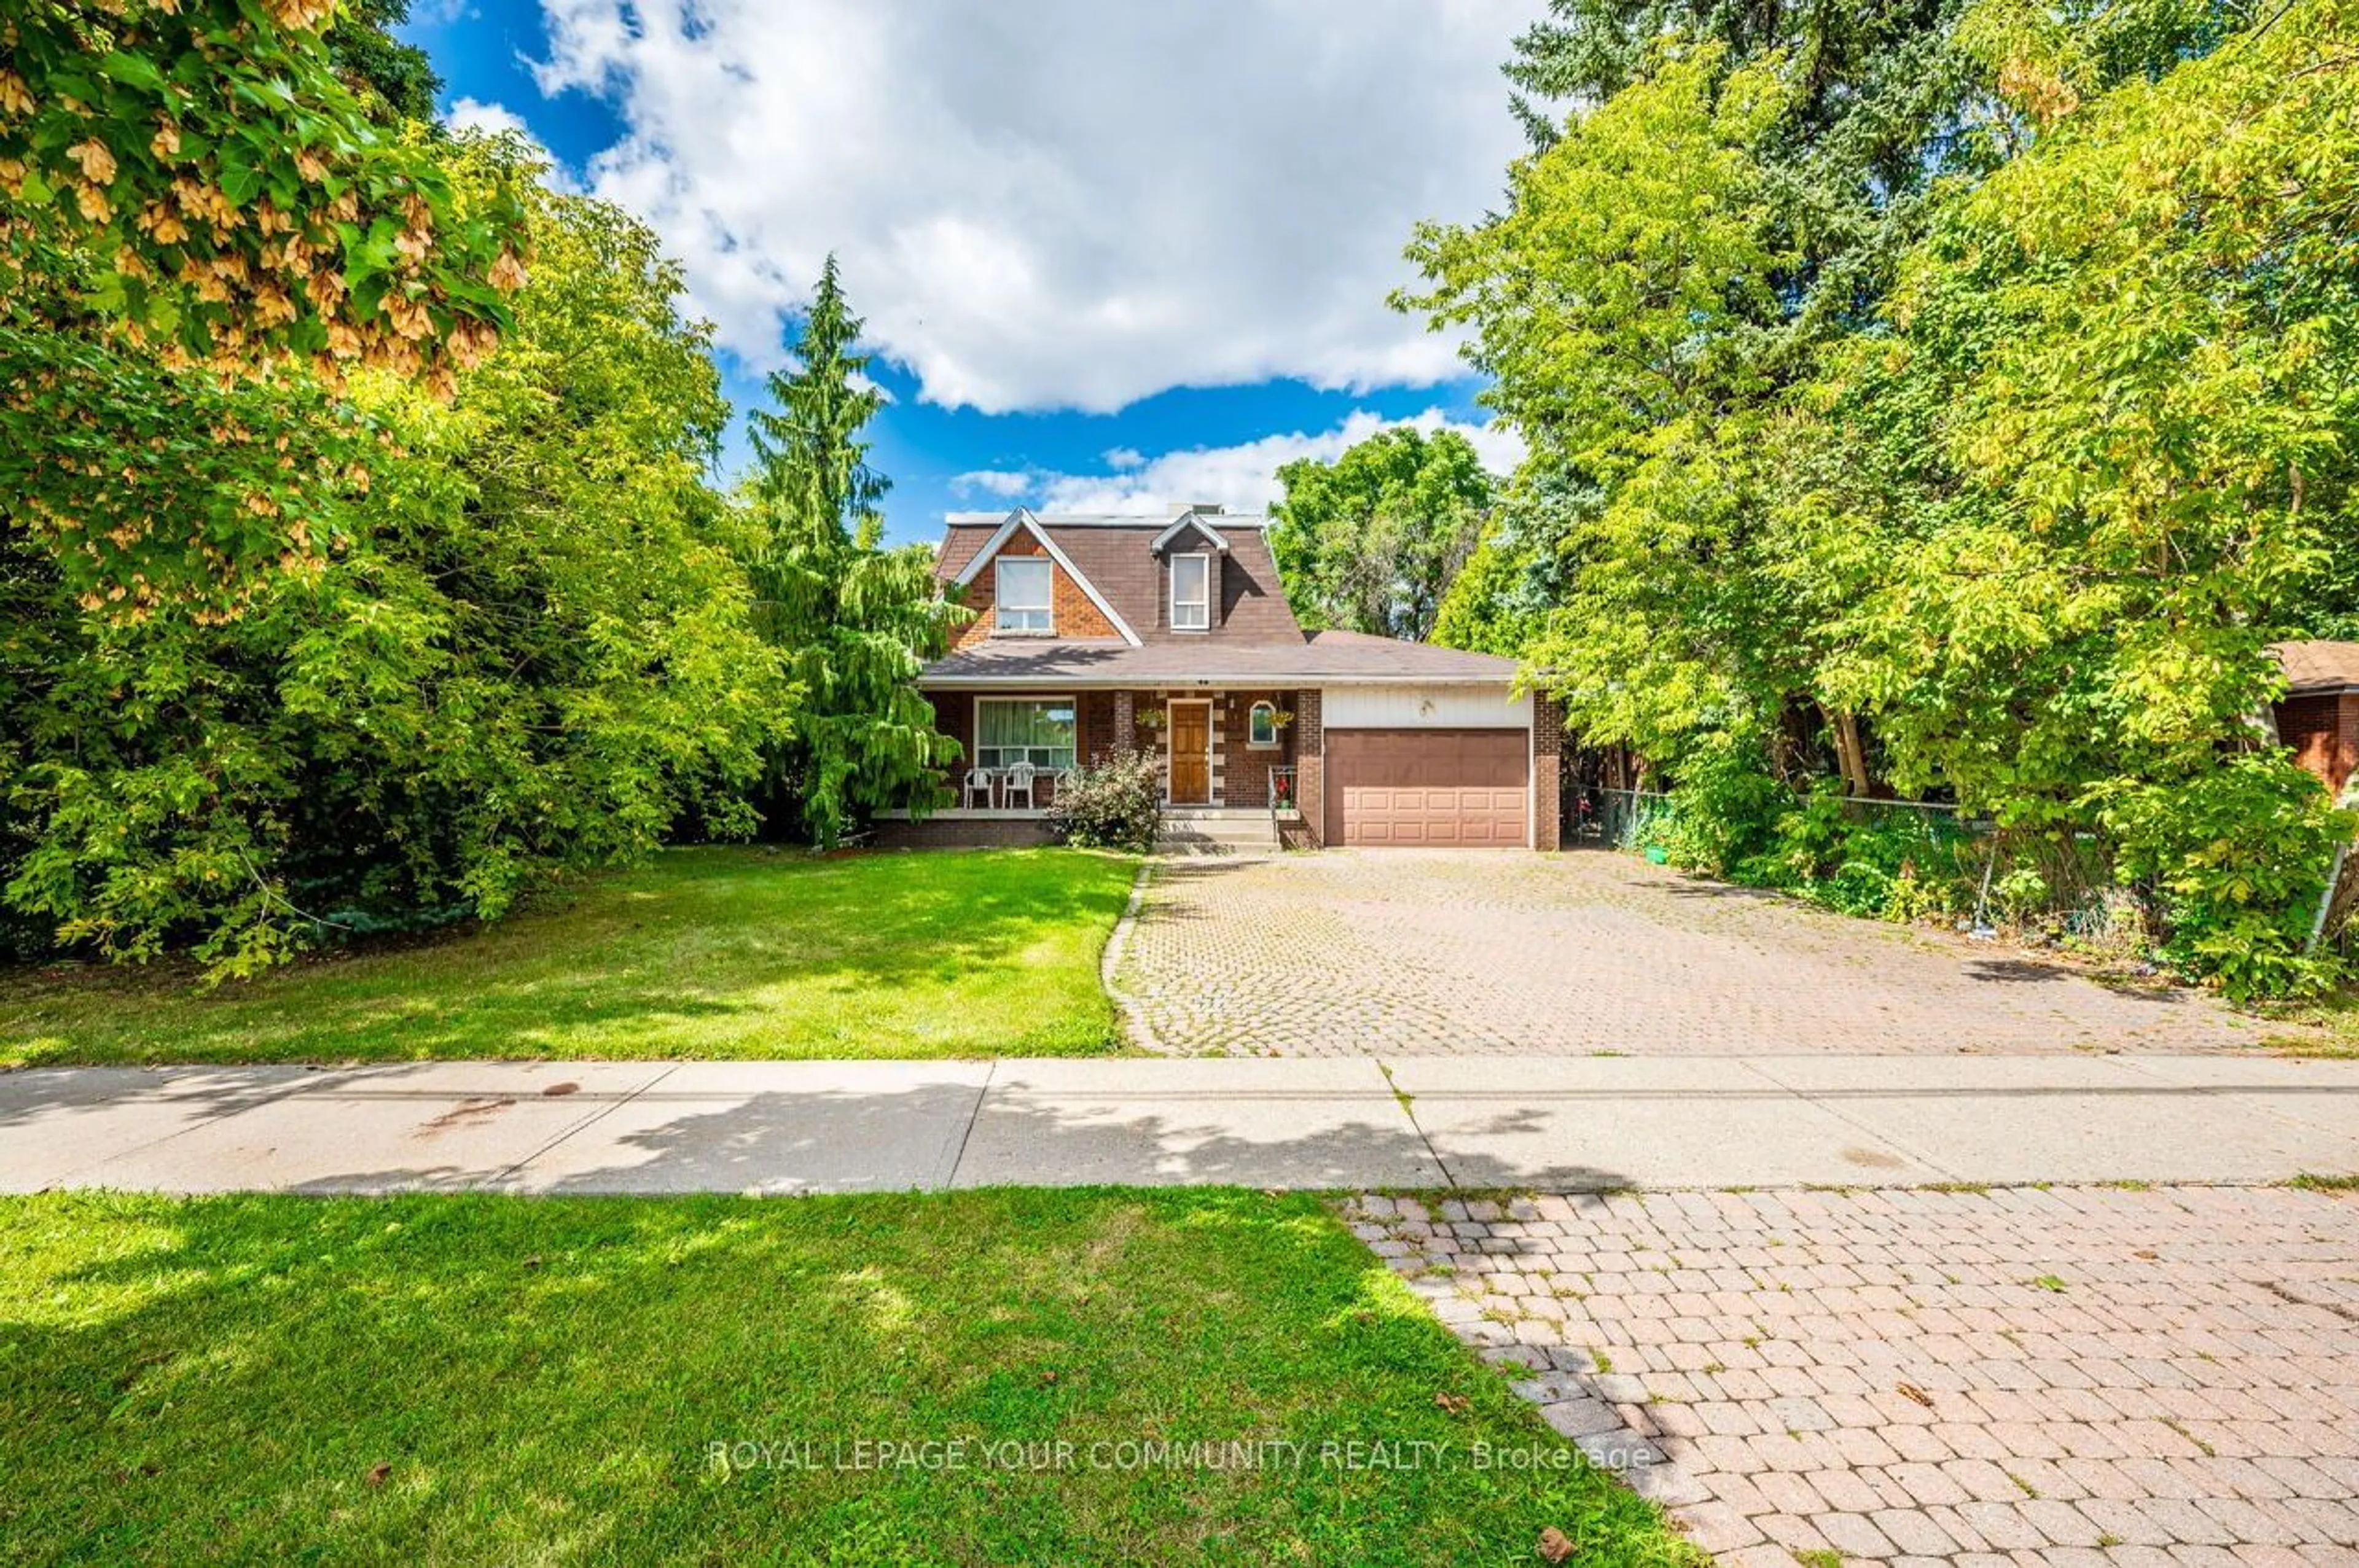 Frontside or backside of a home for 248 Rustic Rd, Toronto Ontario M6L 1W4